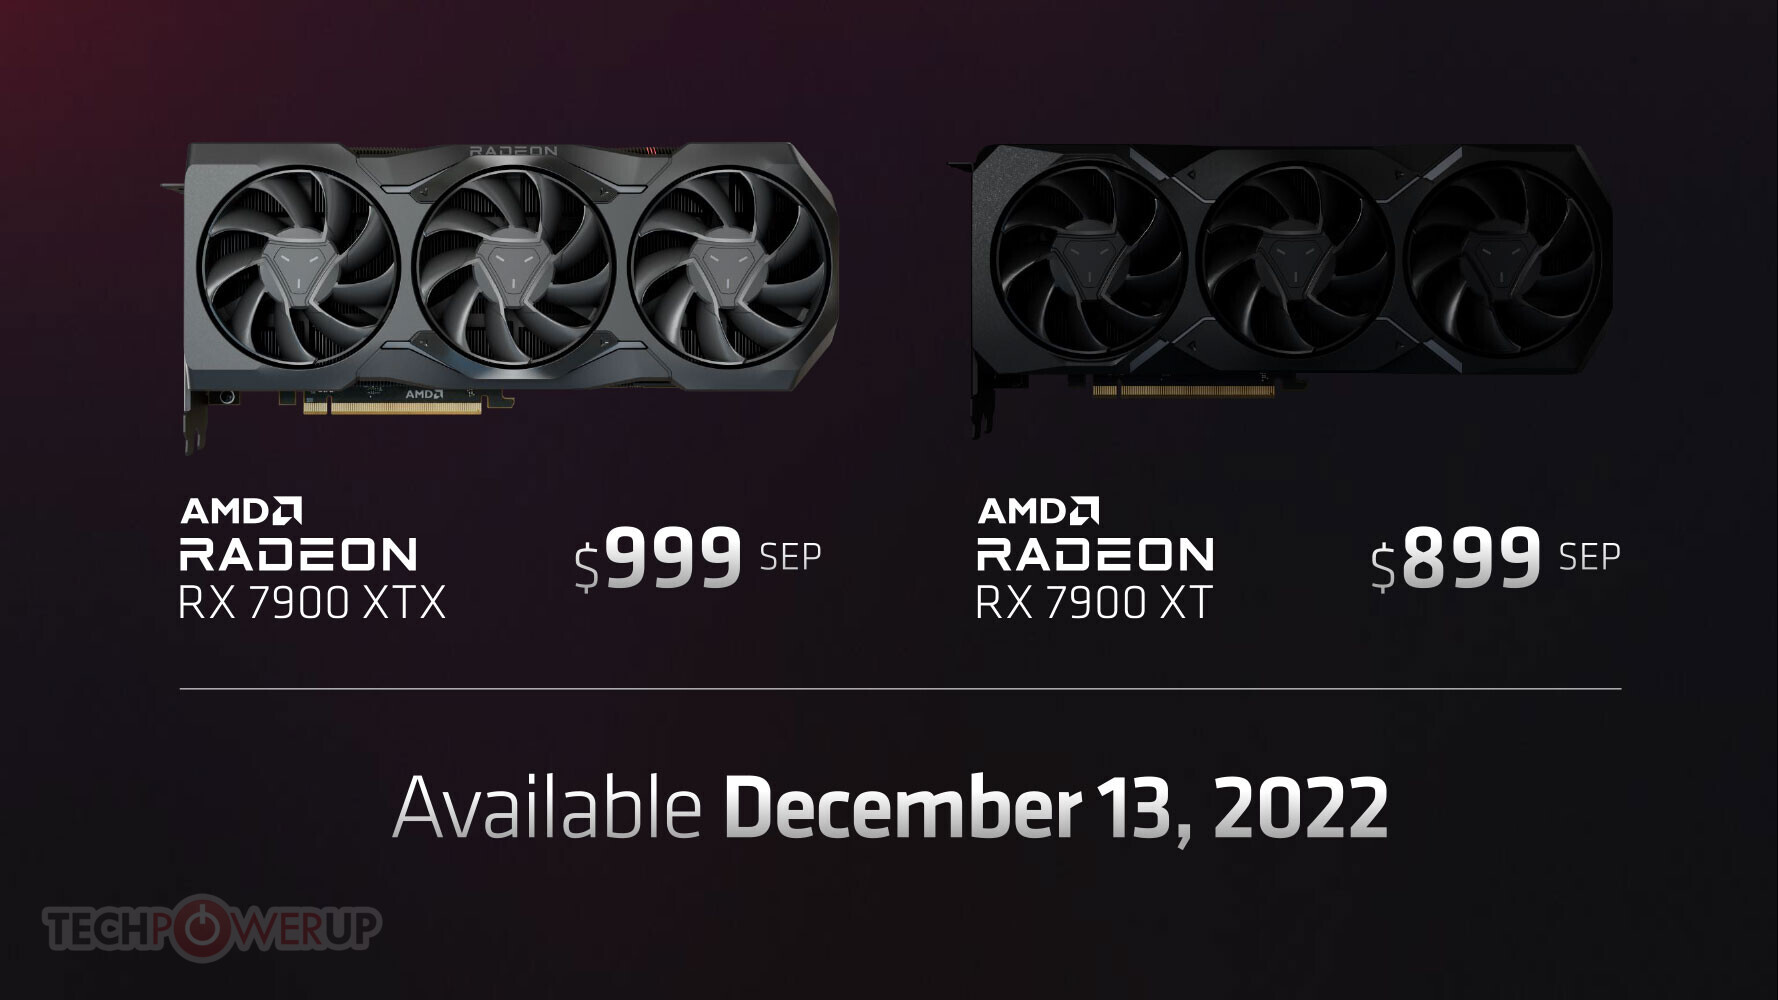 Grab this AMD RX 7800 XT graphics card for £475 thanks to a 20% off code